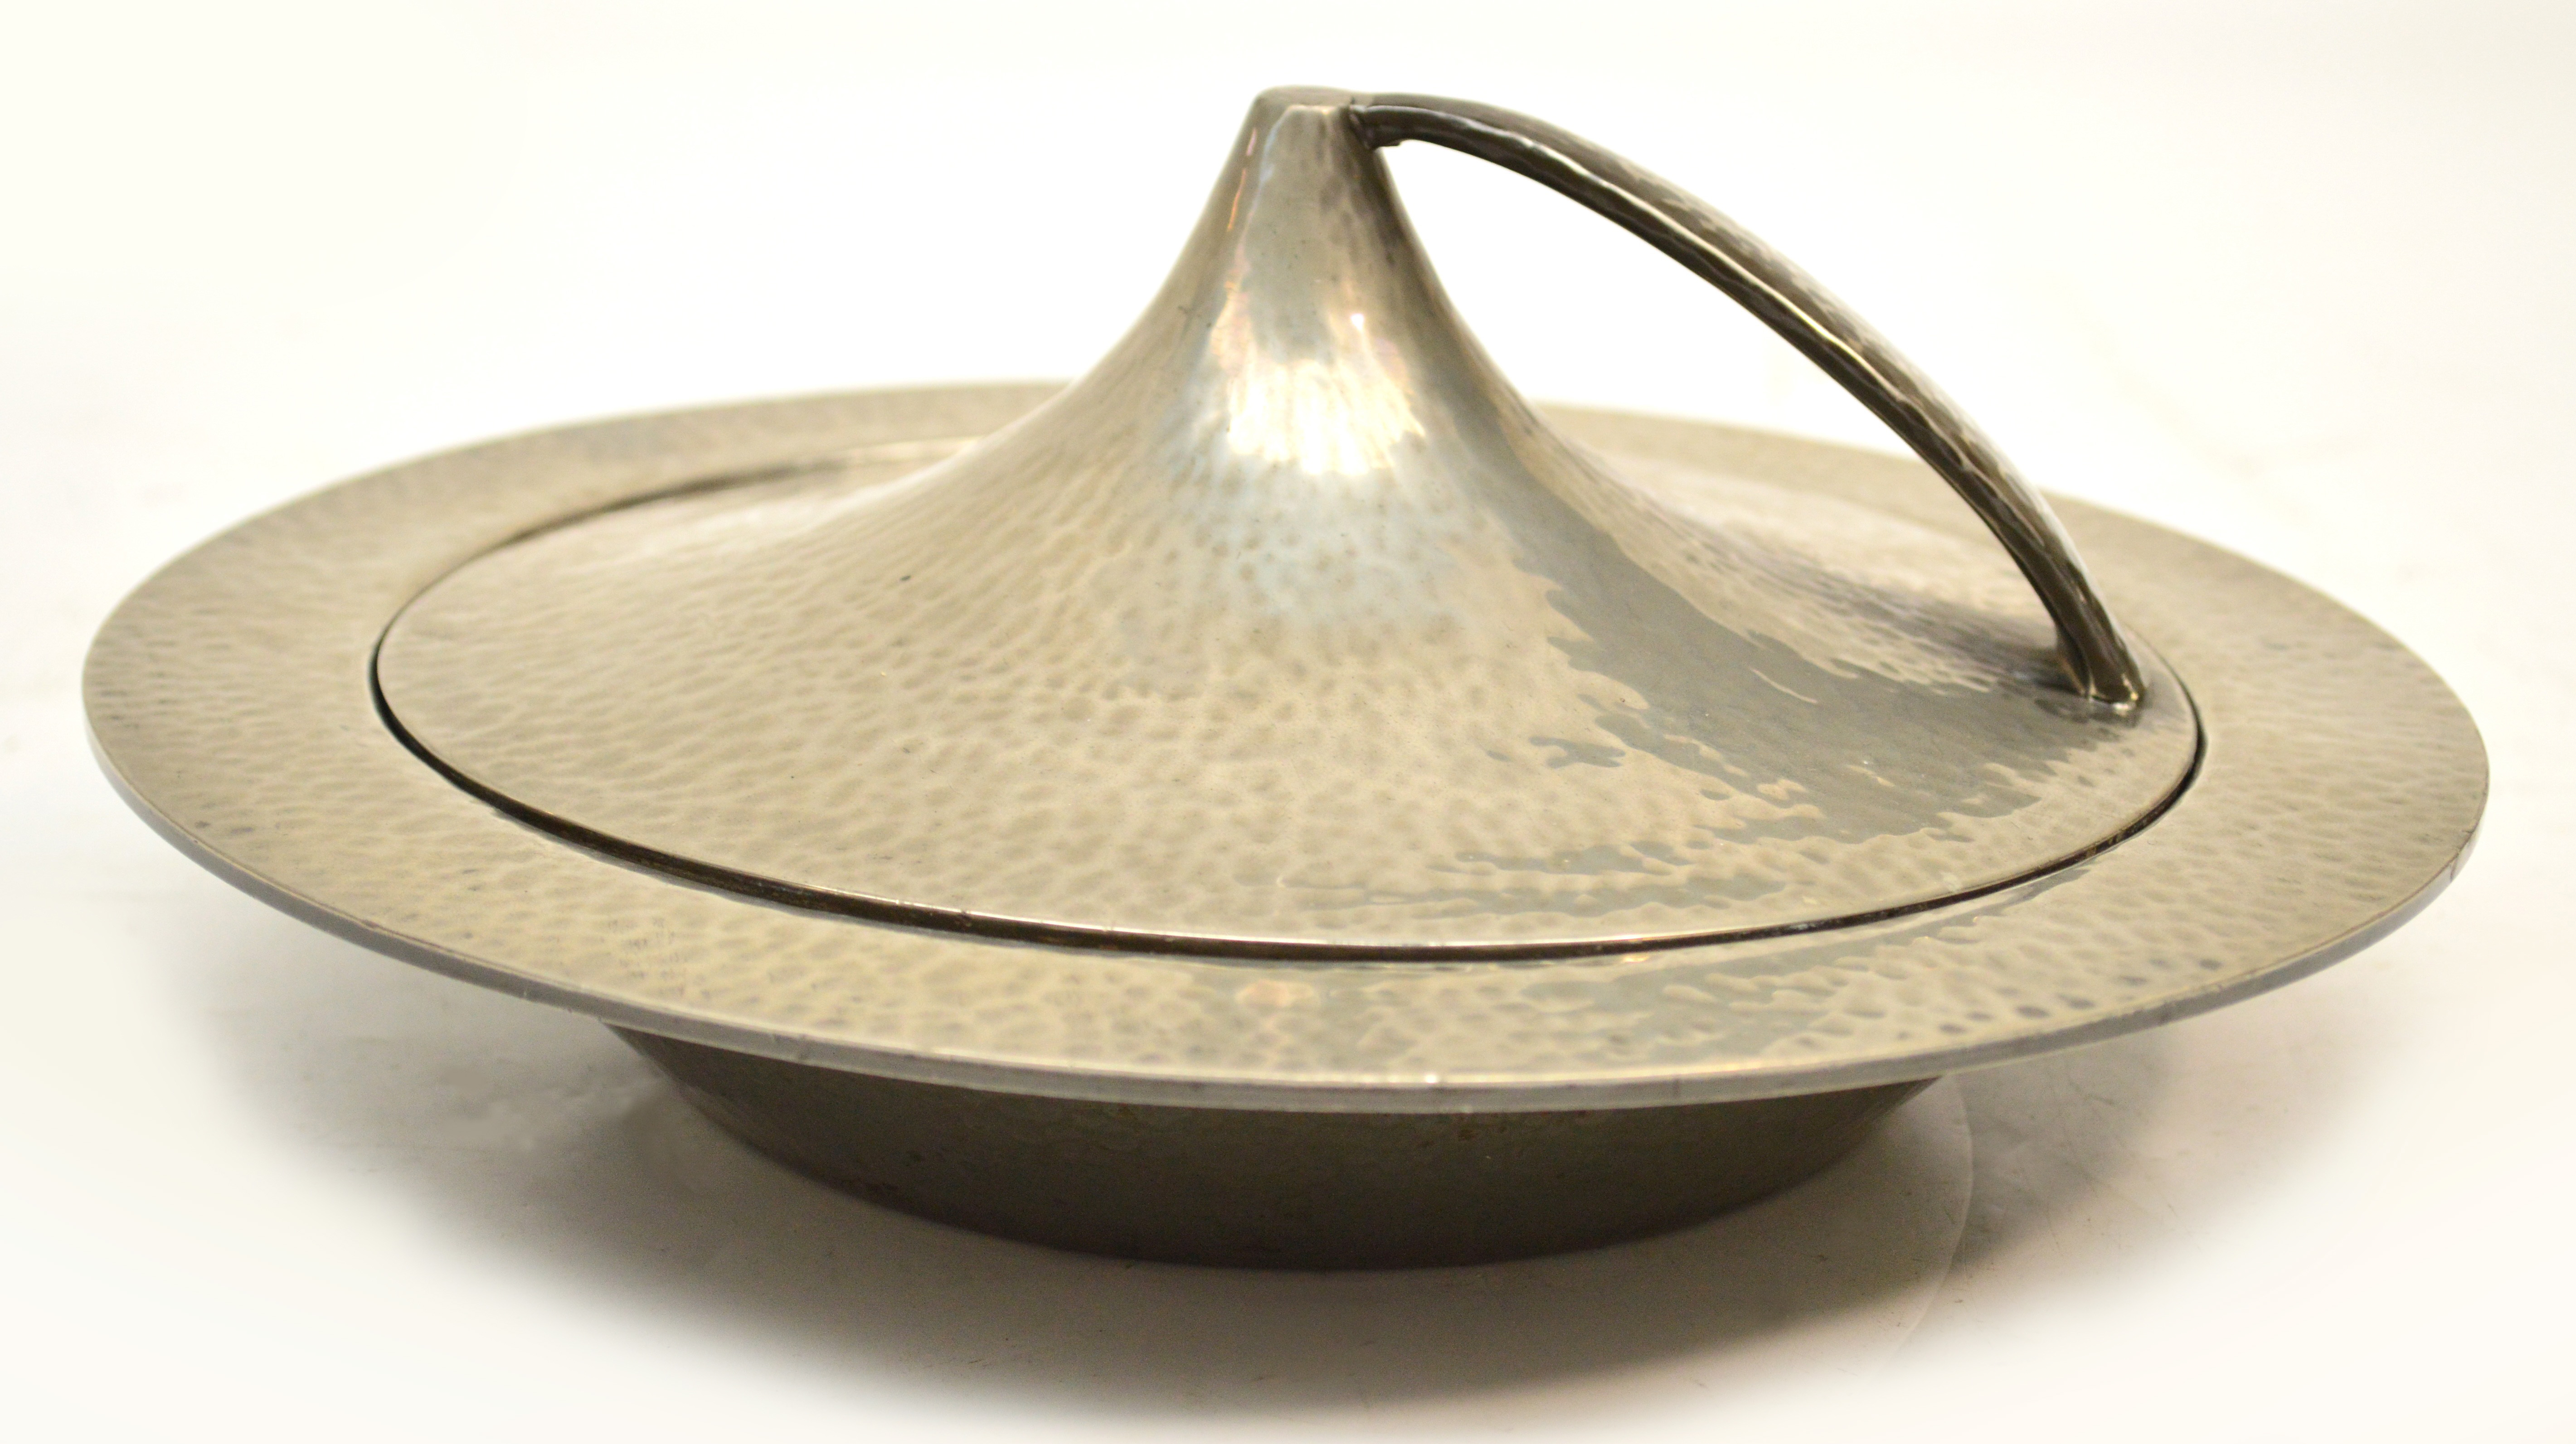 A Liberty & Co "Tudric" circular beaten pewter muffin dish and cover designed by Archibald Knox with